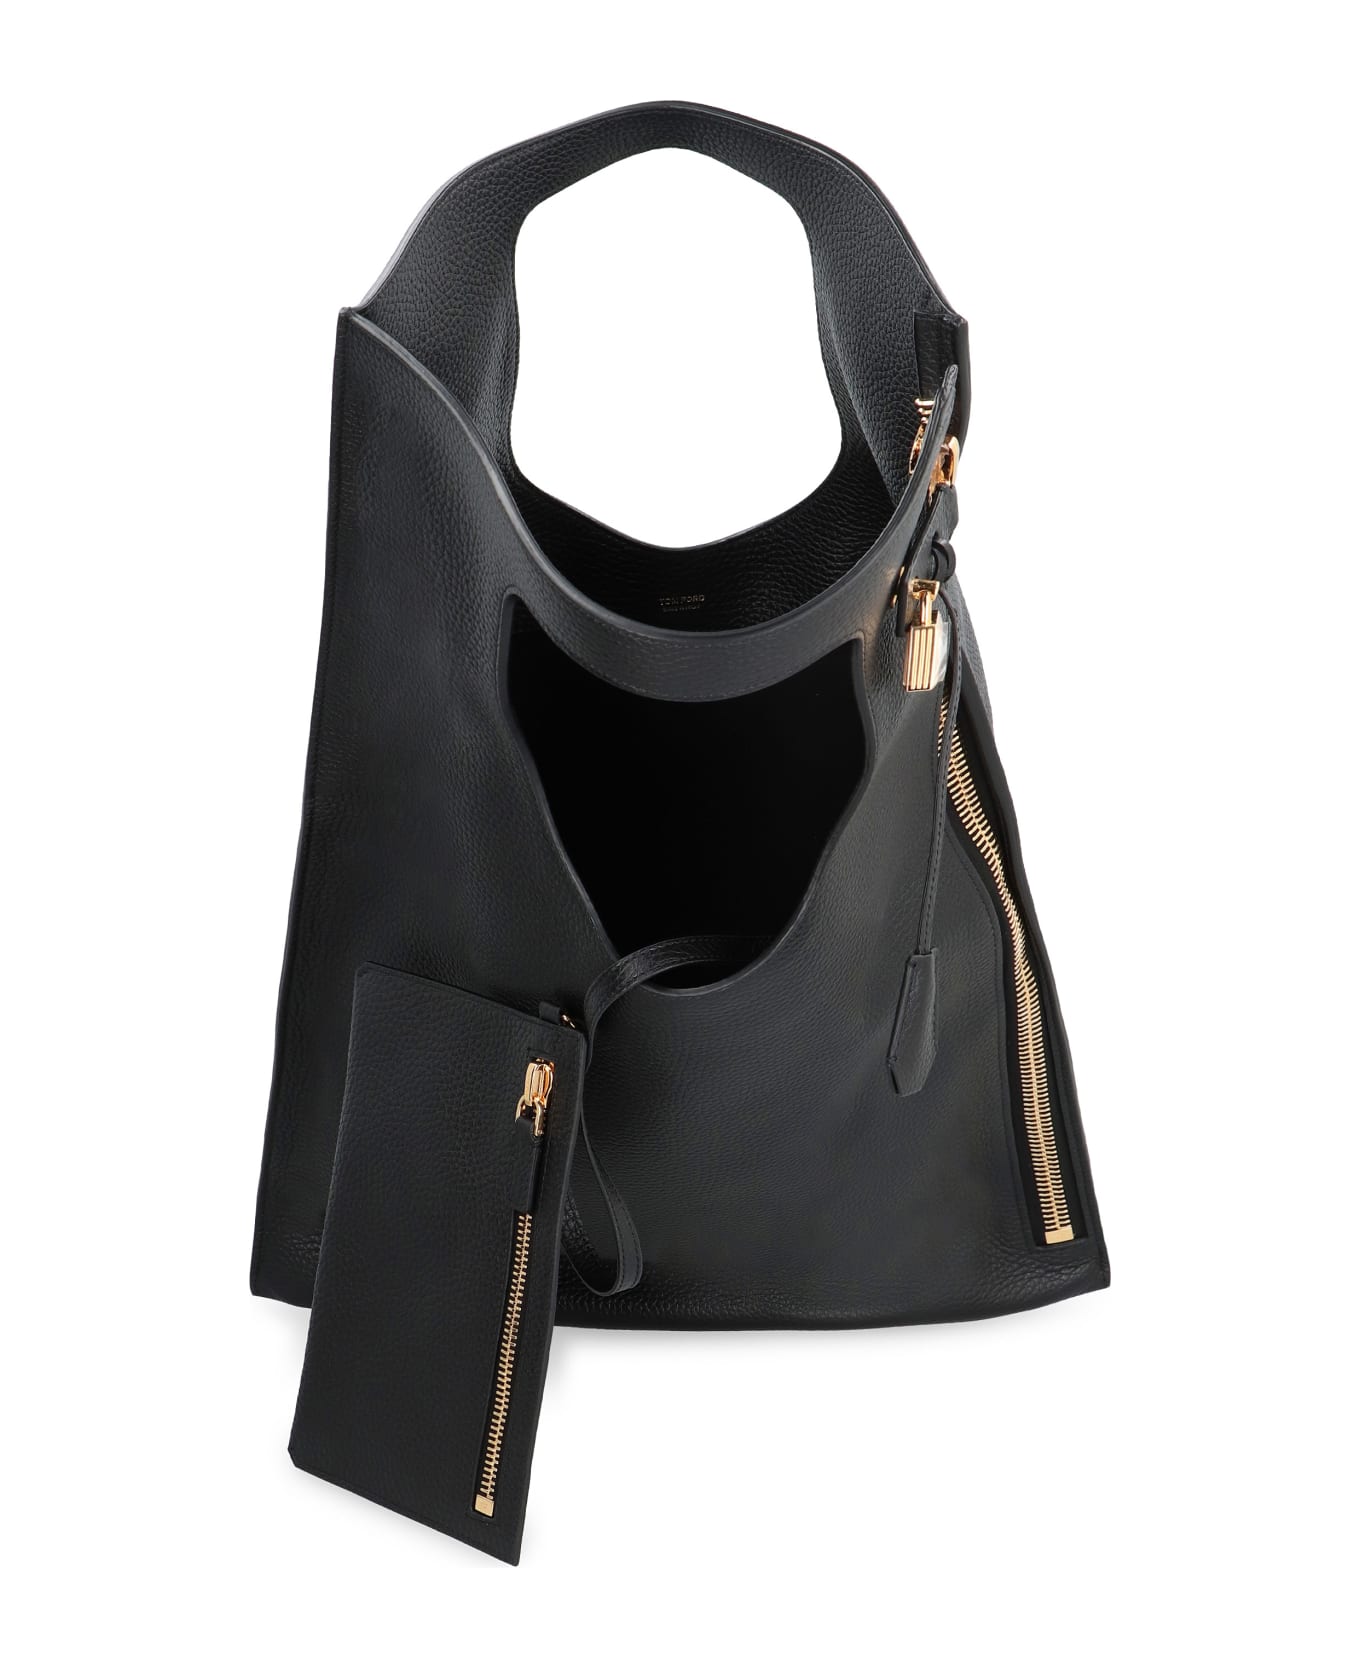 Tom Ford Alix Leather Tote - black